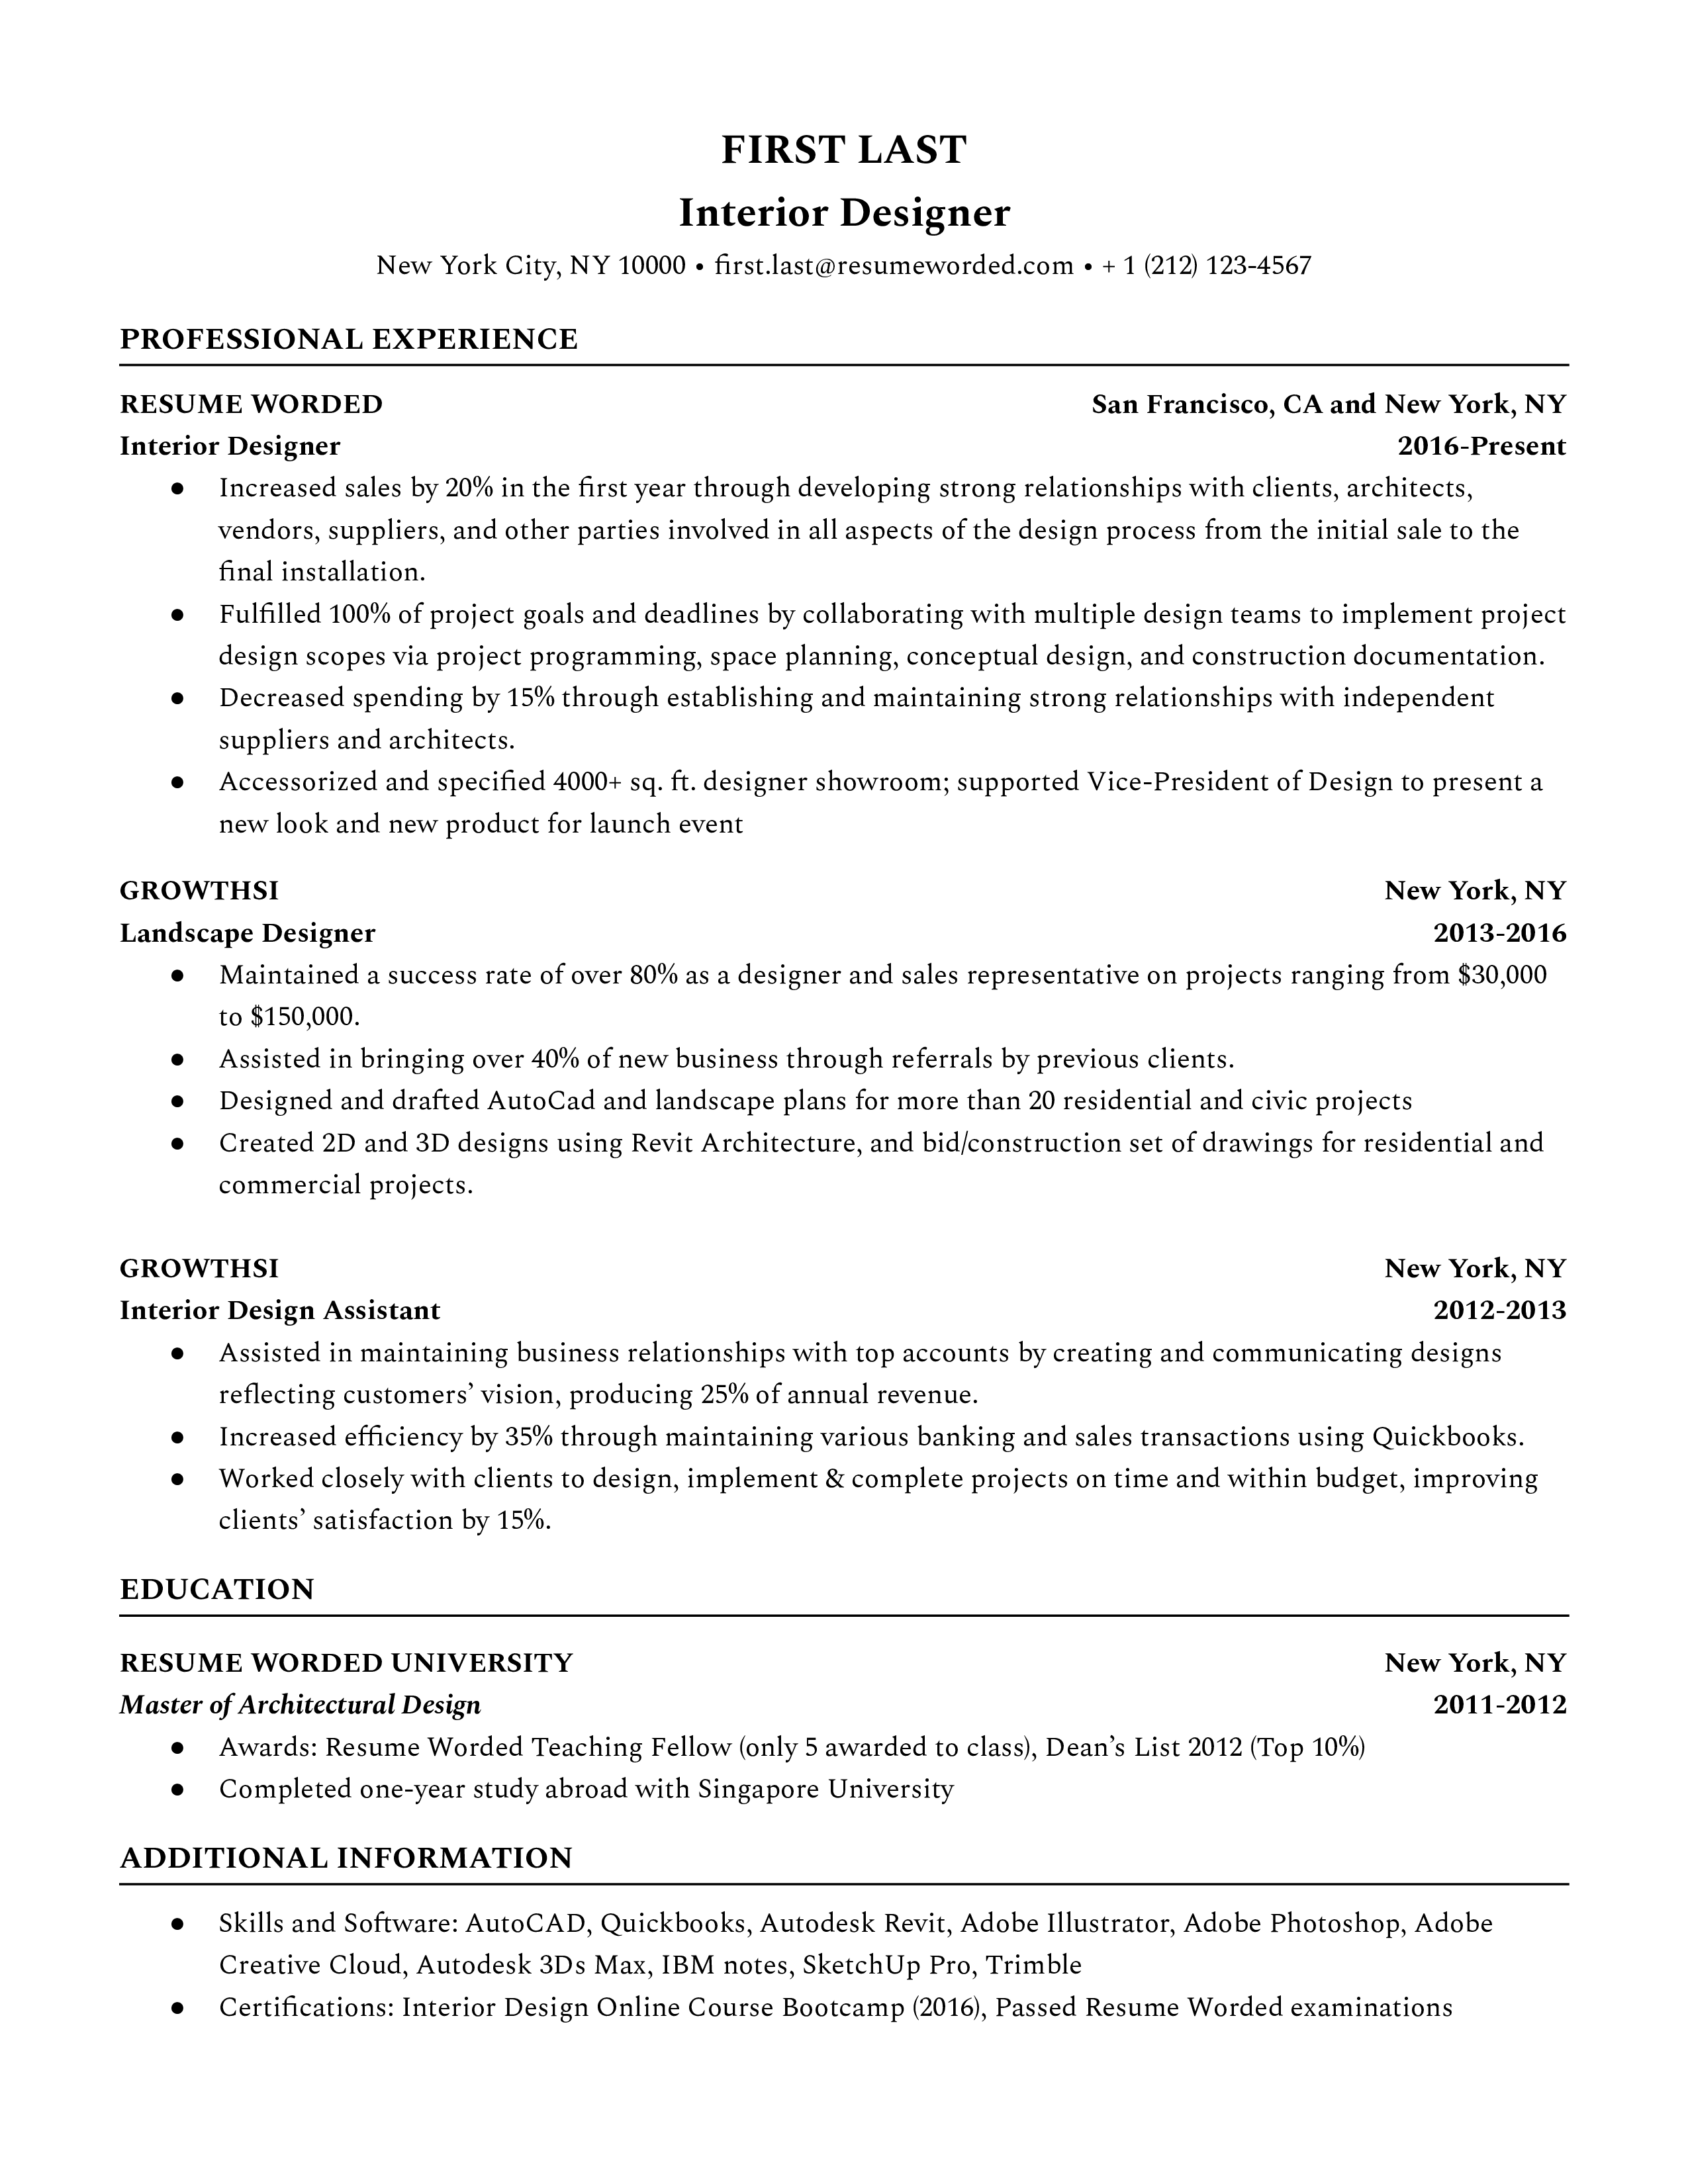 Interior designer resume featuring design software skills and diverse project accomplishments.